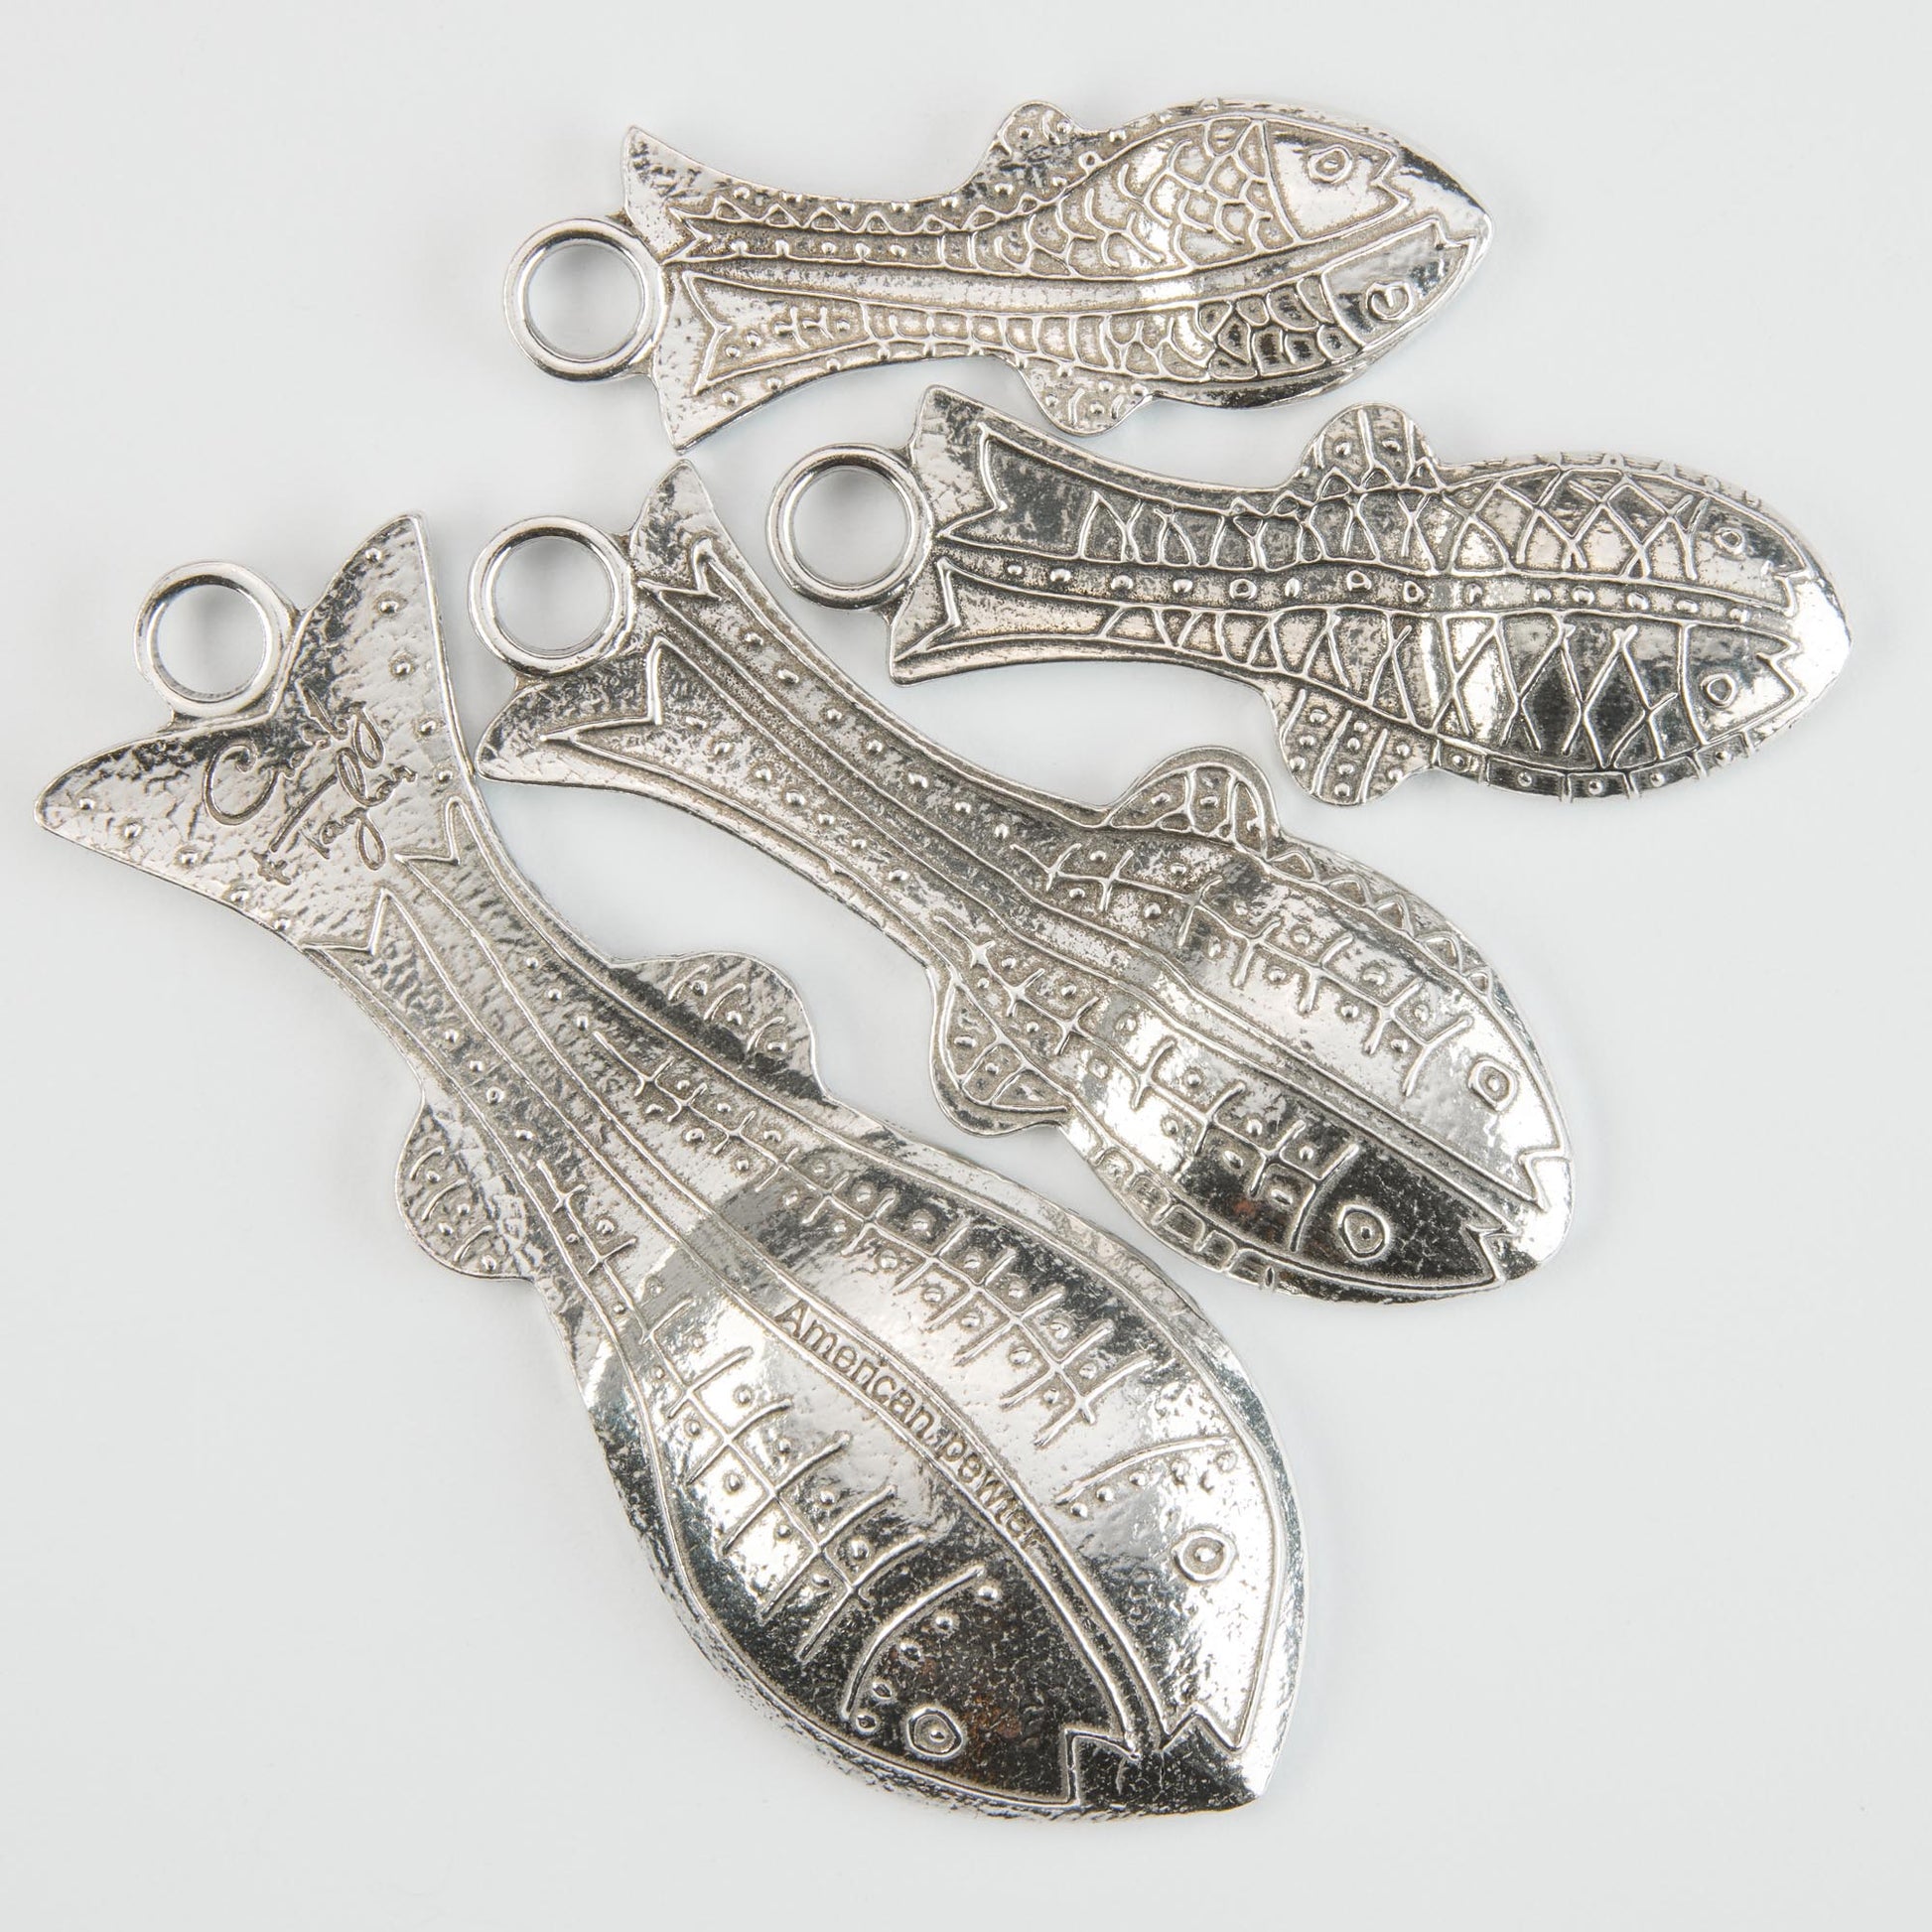 Rare Glass Fish Shaped Set Of Measuring Spoons made in Pescadoro